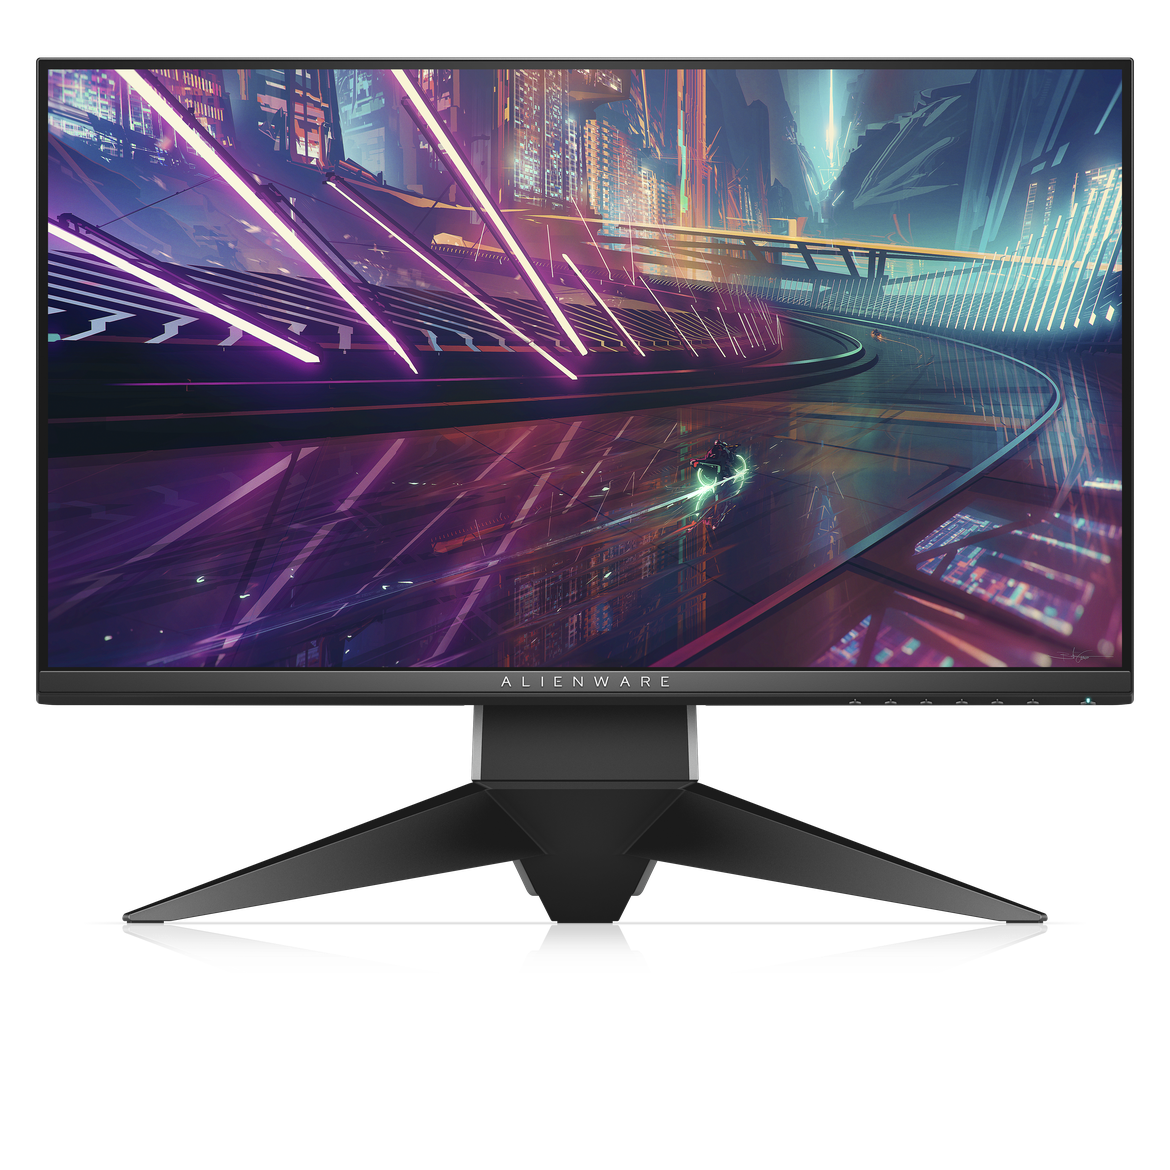 Alienware 25" 1920x1080 HDMI DP USB 3.0 240hz 1ms NVIDIA G-SYNC HD LCD Gaming monitor - AW2518H - image 2 of 11